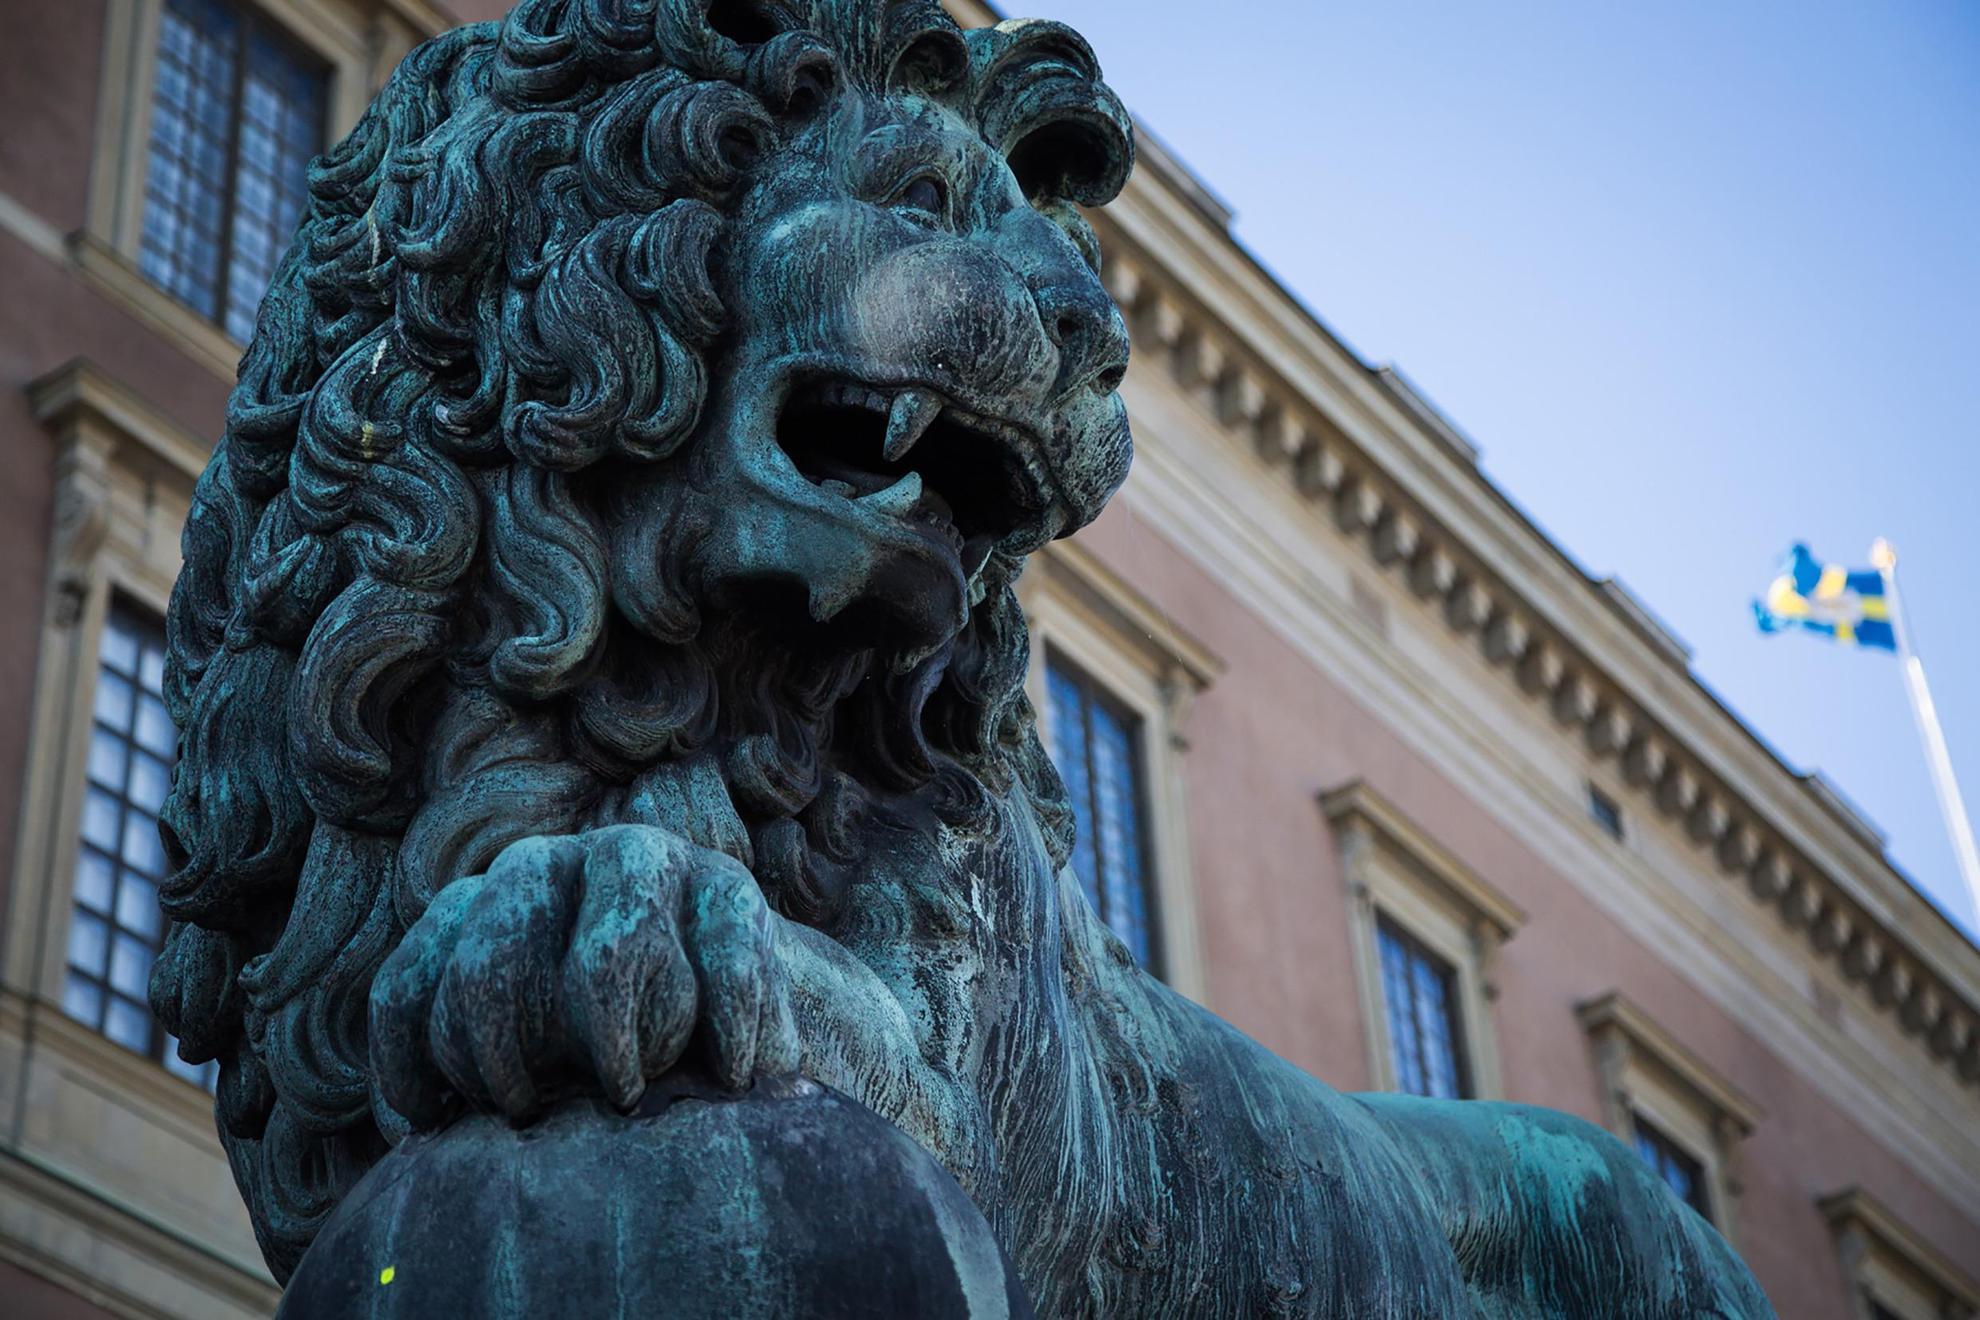 Lion statue outside of The Royal Palace